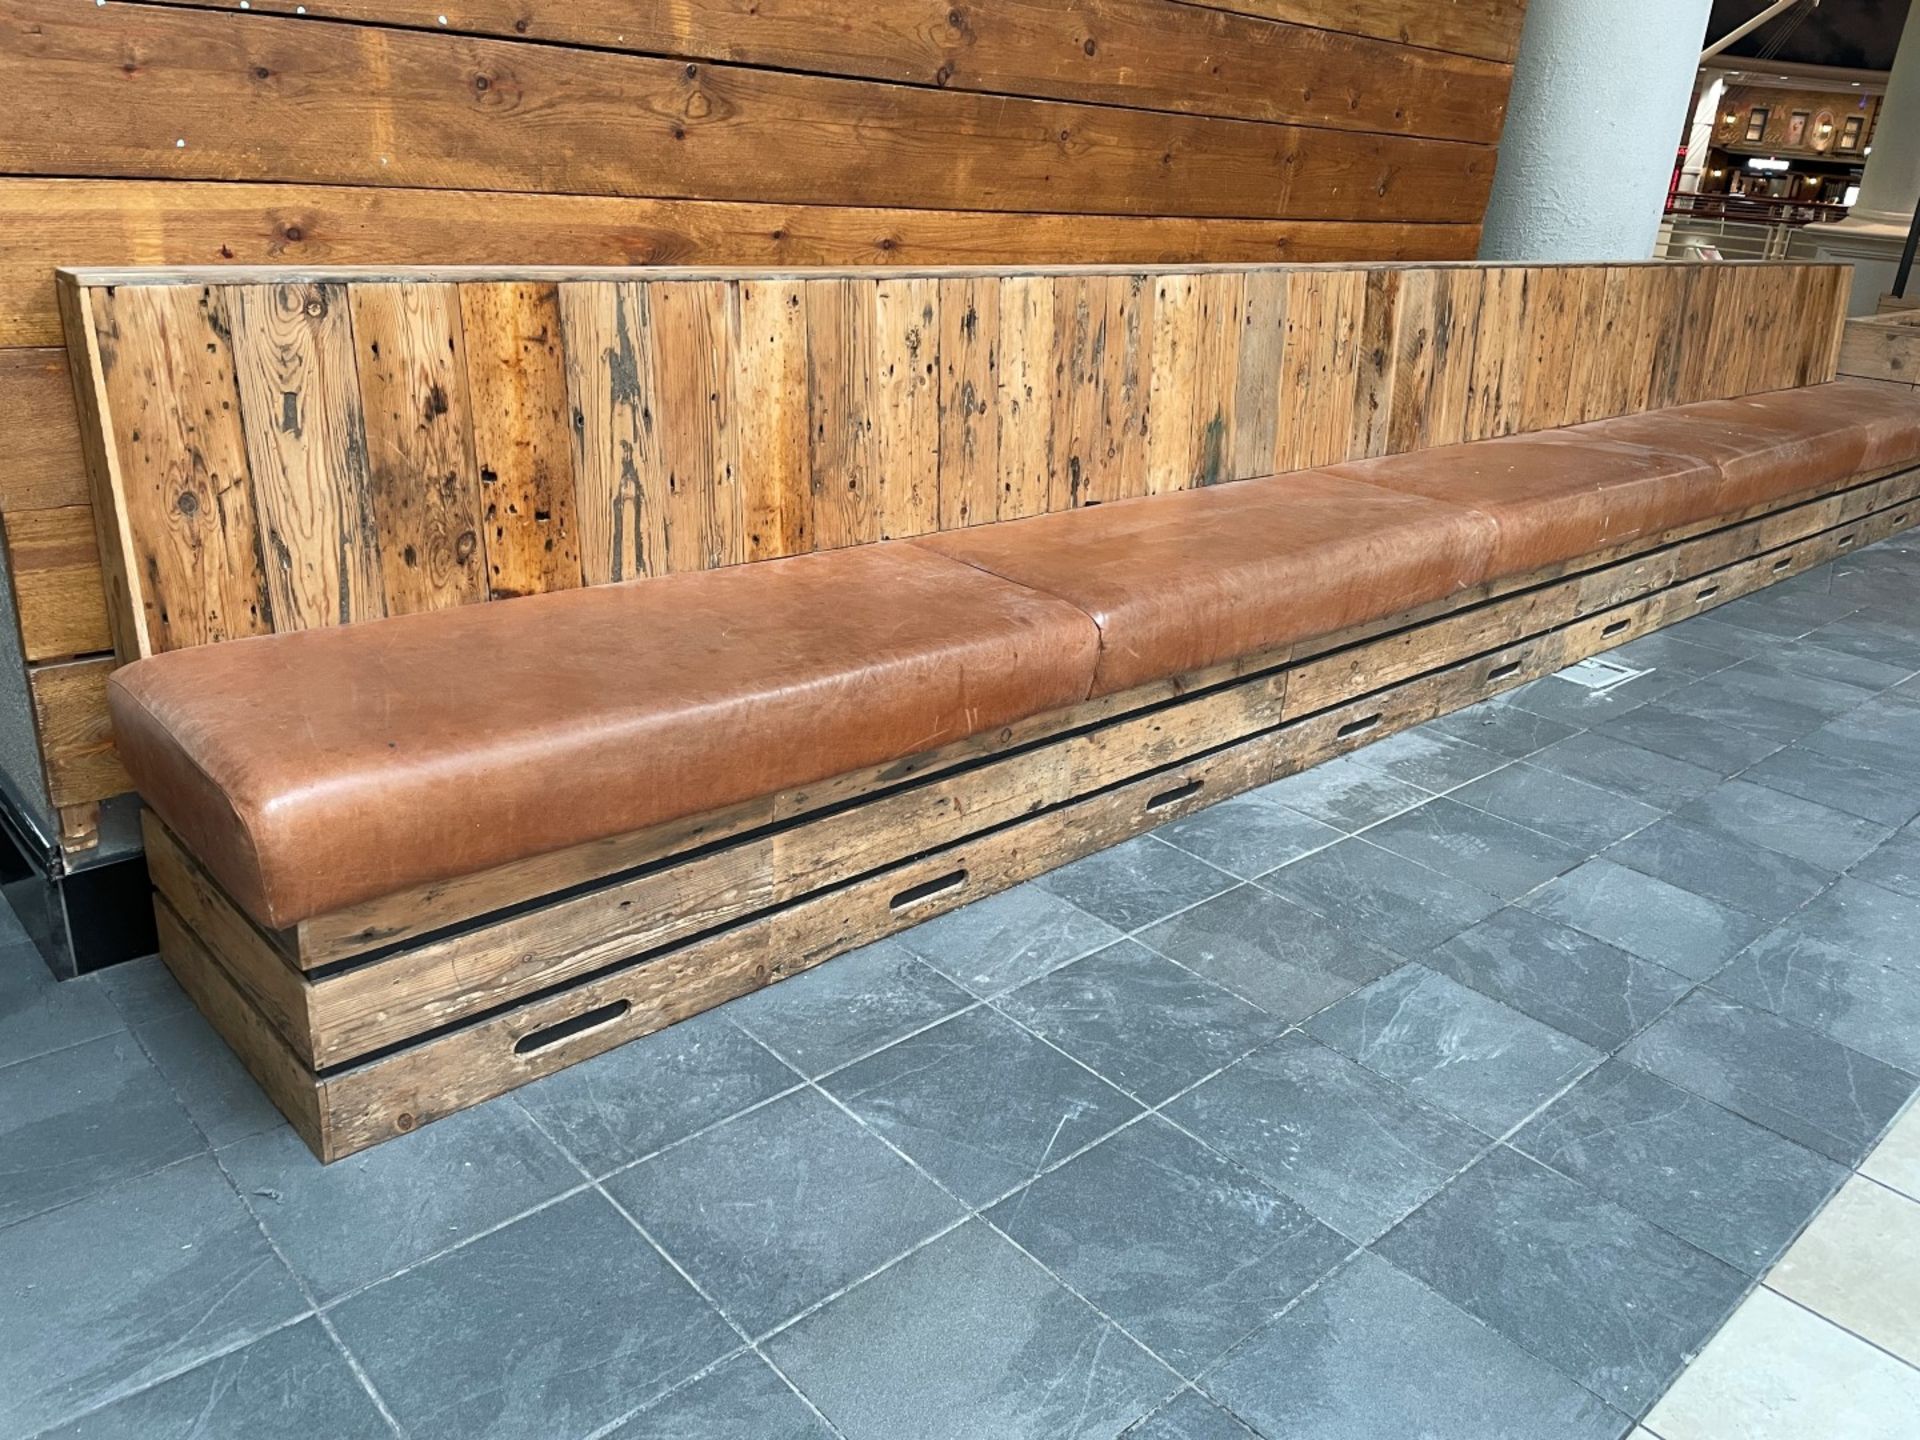 1 x Rustic Wooden Seating Bench Featuring Tan Leather Seat Pads - Suitable For Restaurants or Bars! - Image 7 of 12